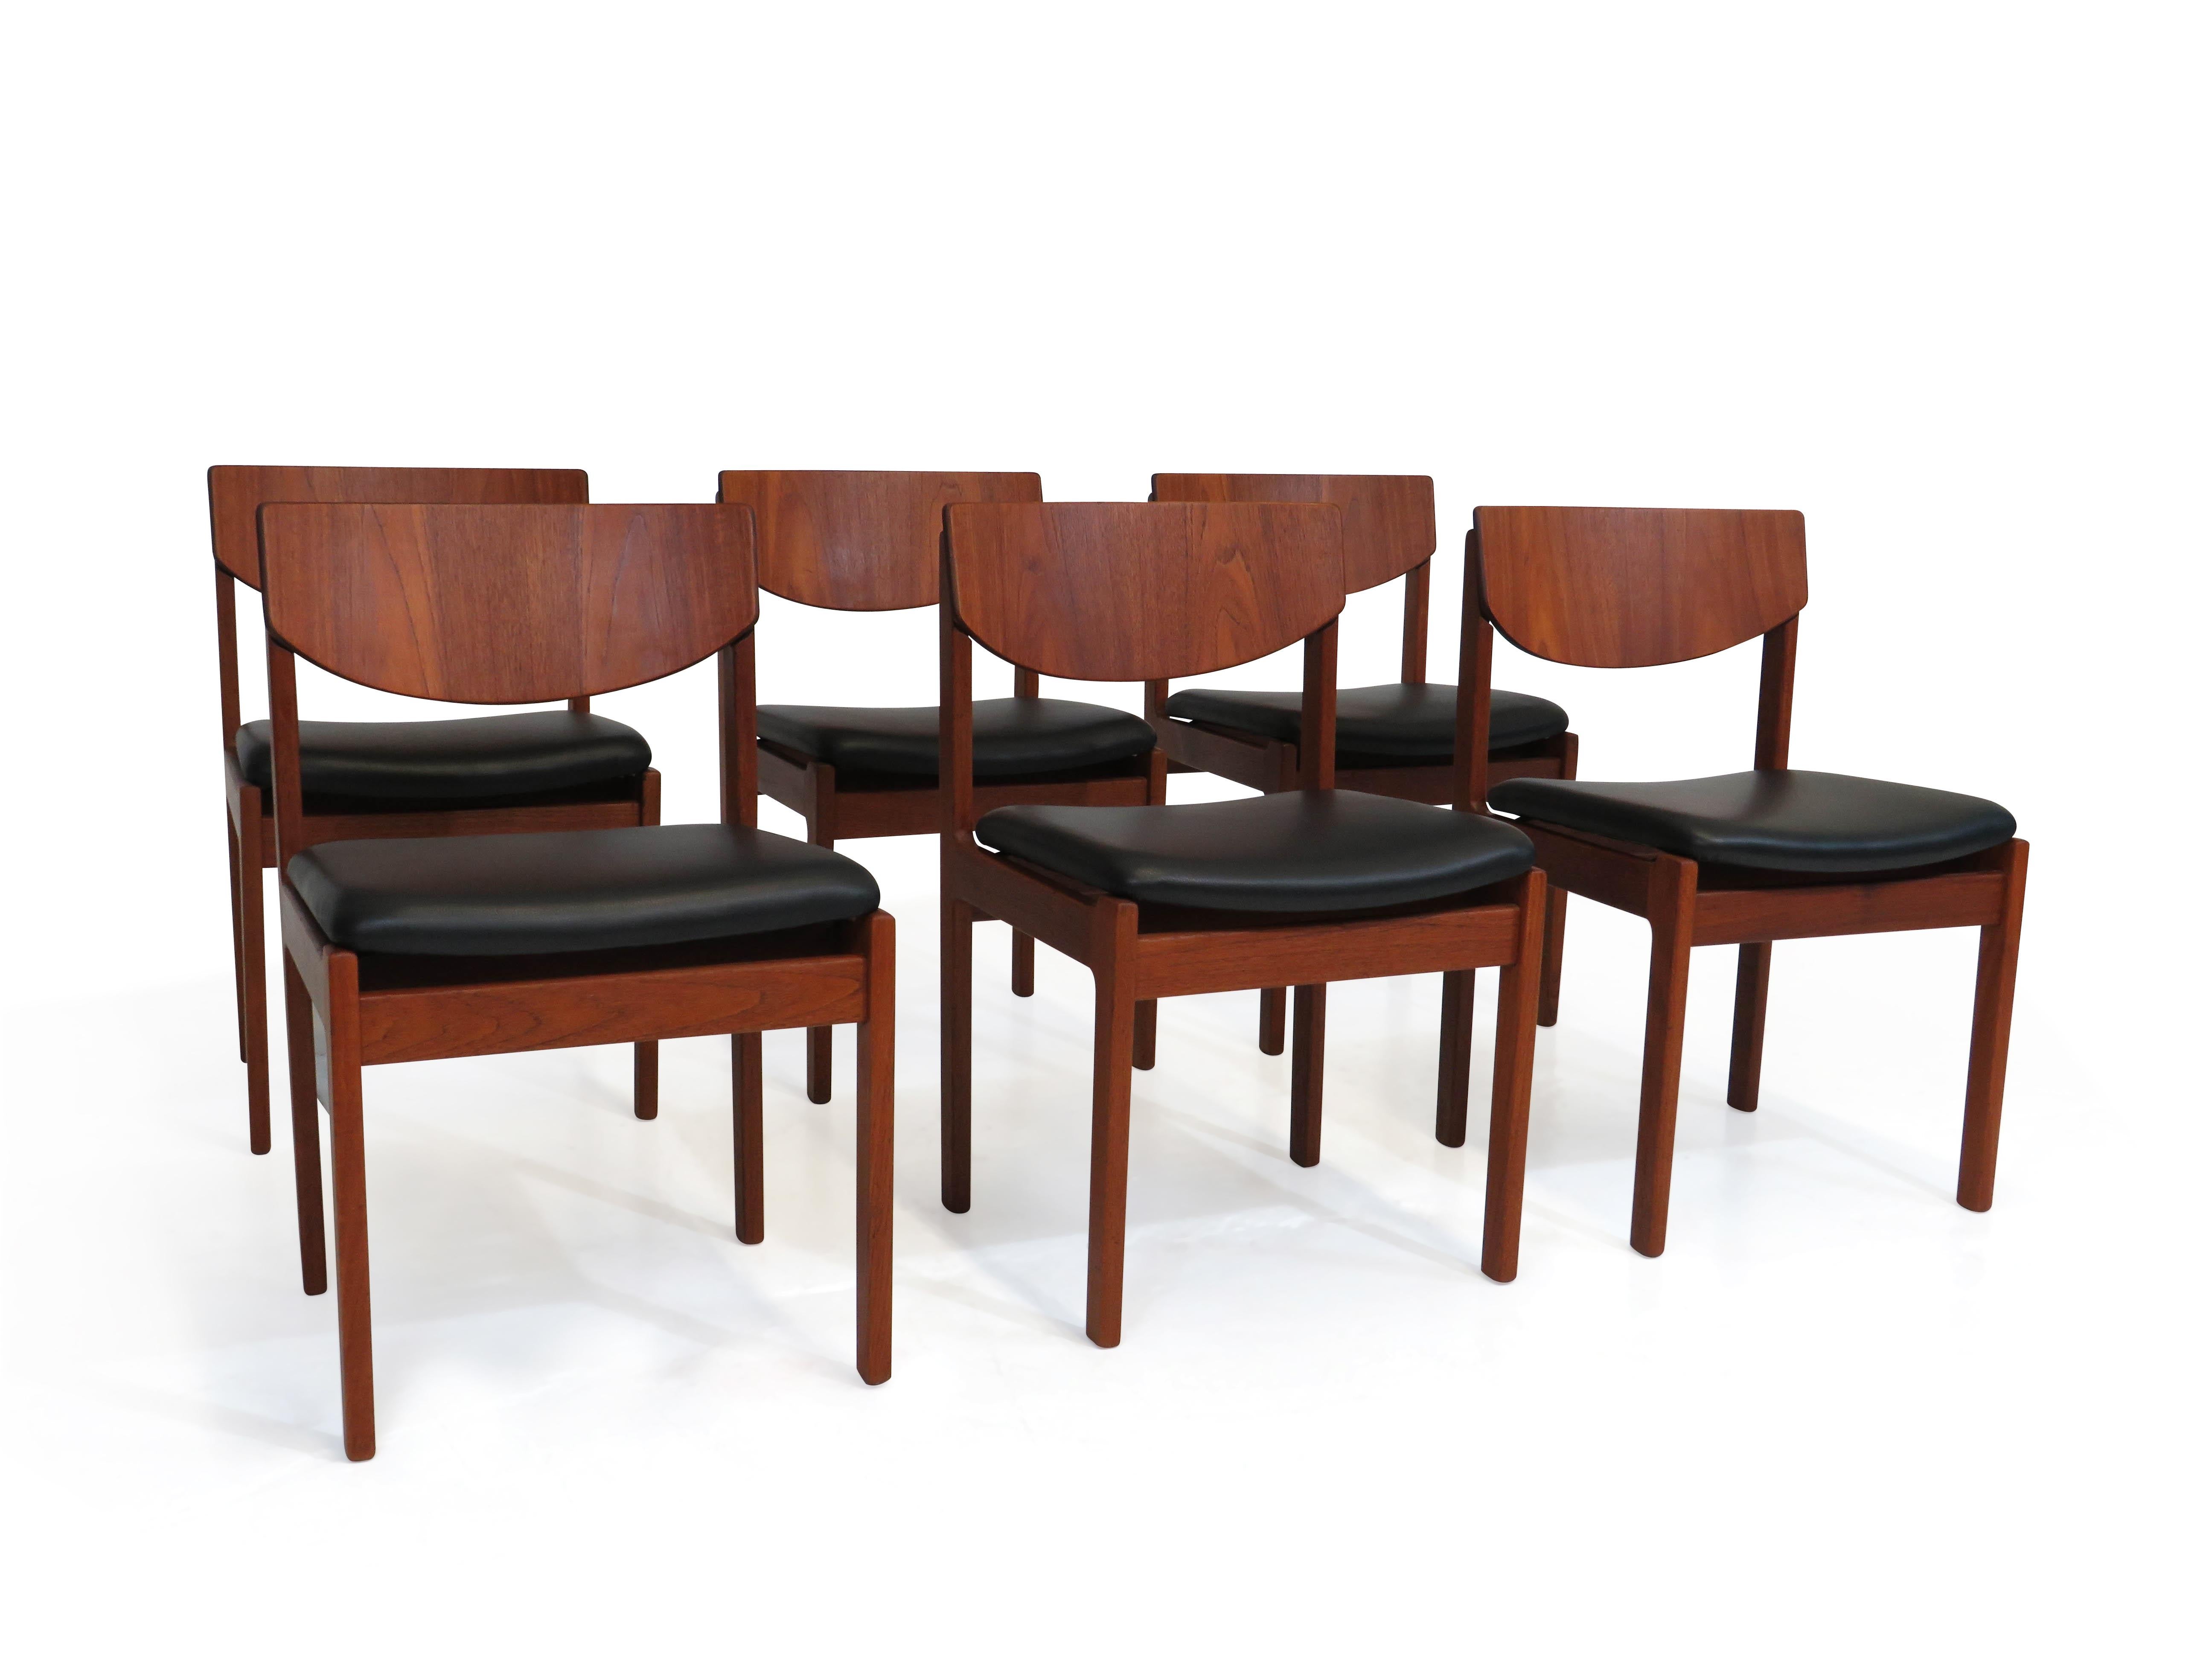 Six mid-century dining crafted of solid old-growth teak, with sturdy joinery, comfortable curved backrest and newly upholstered seats in black leather. Manufactured in Denmark during the early 1960s. The wood has been professionally restored in a